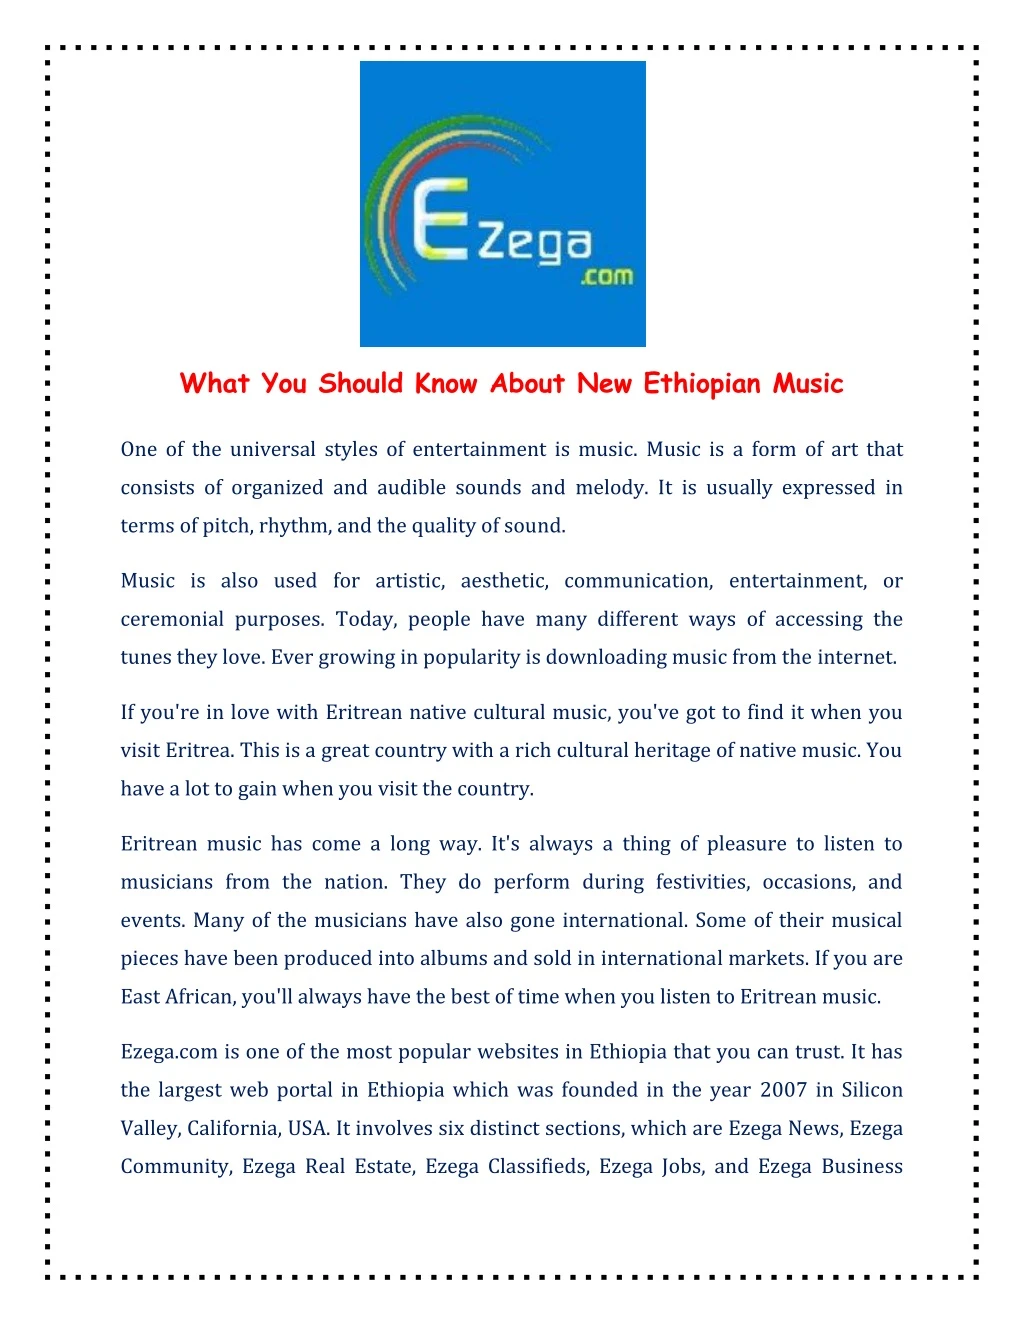 what you should know about new ethiopian music